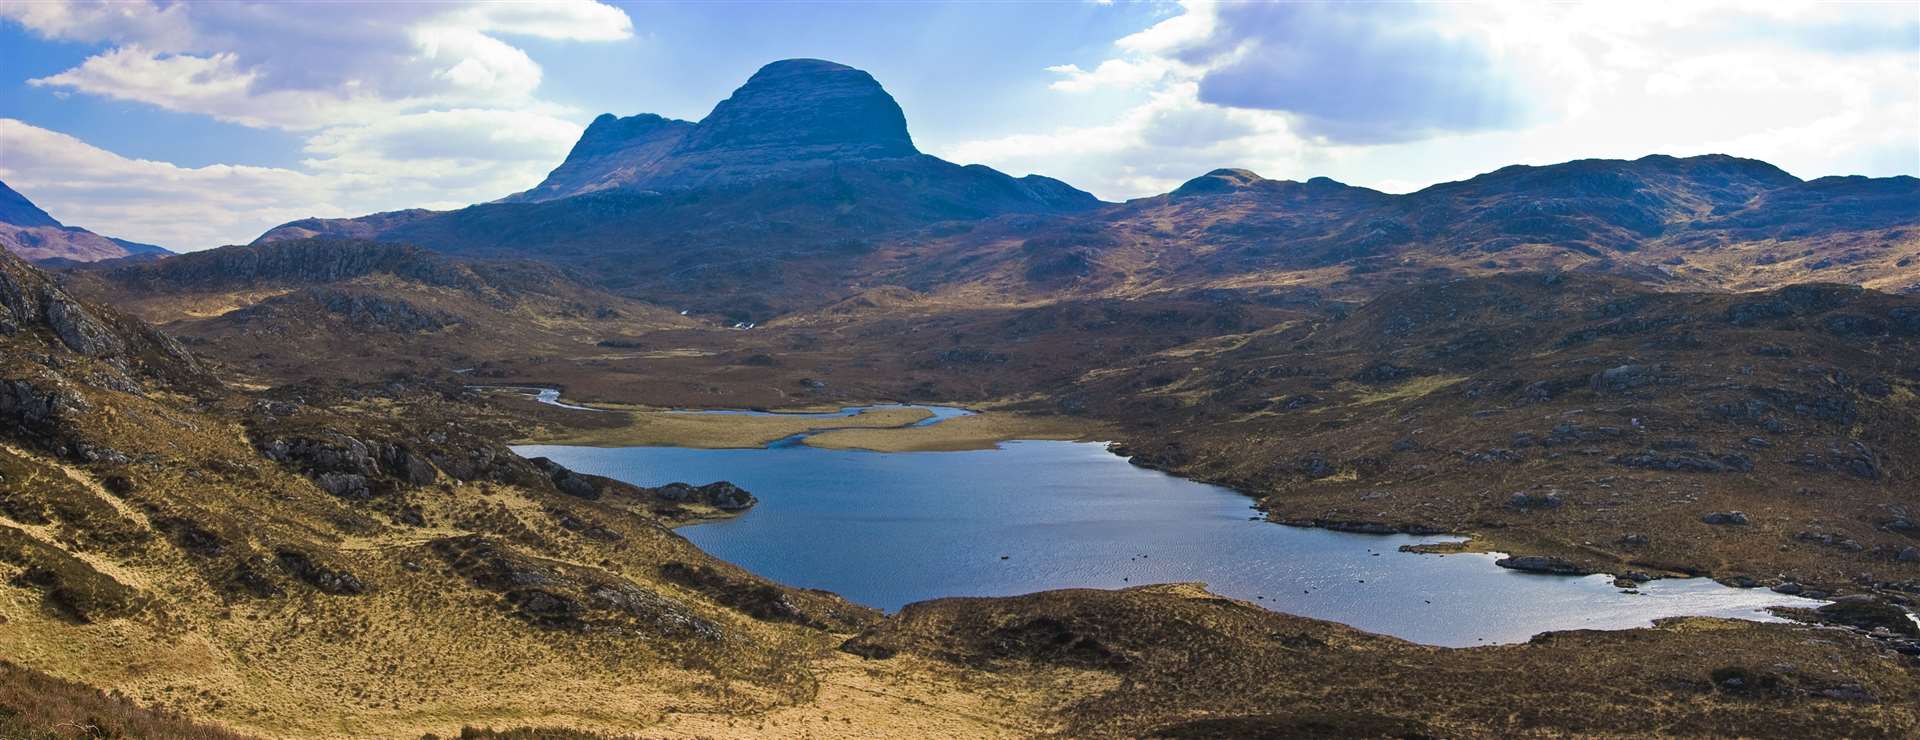 De-population for some parts of the Highlands is not new and over the years we have seen numbers go up and down in alignment with the coming and going of major industries or projects, says our columnist.